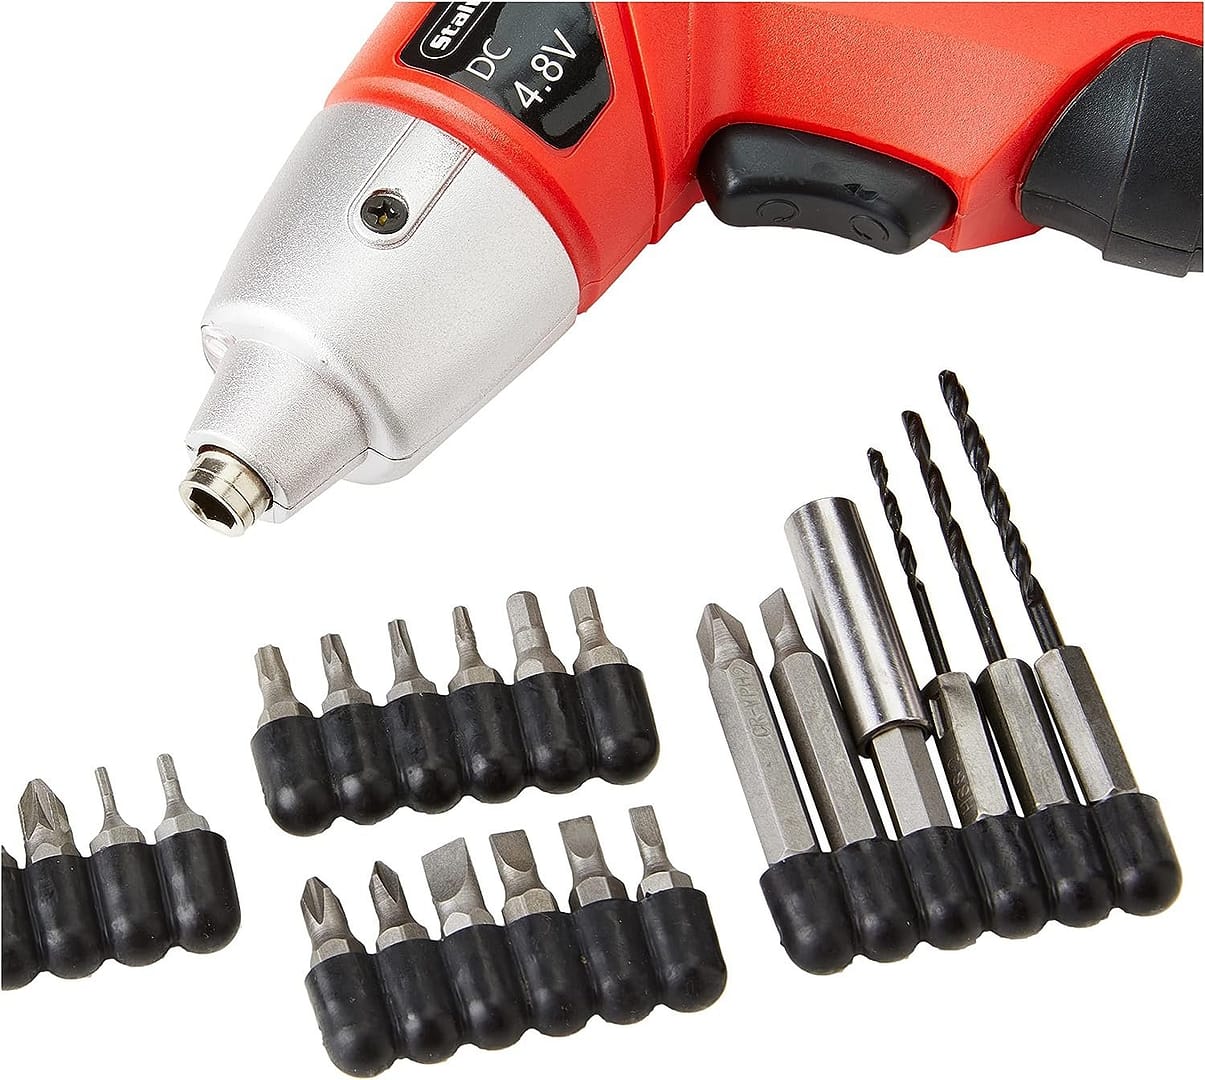 25 piece electric screwdriver set cordless drill with led work light automatic spindle lock carrying case and screw driv 1